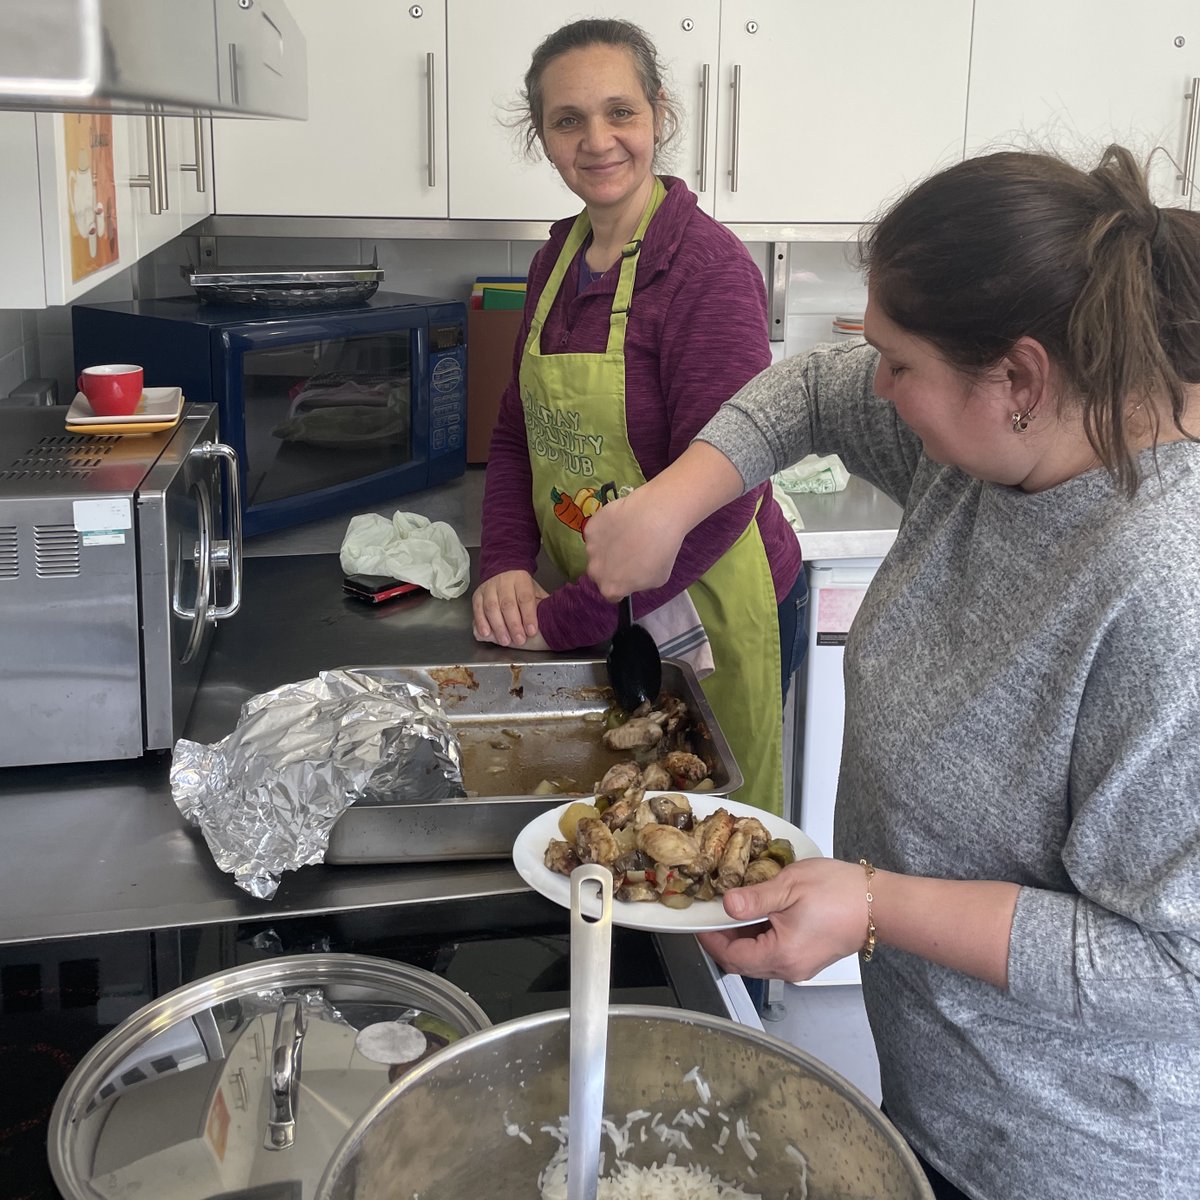 Seyda and Narin always adding the flavour and community spirit at our weekly cook up on Thursdays! We’re serving from 12:30-2PM if you’d like to join us for lunch.